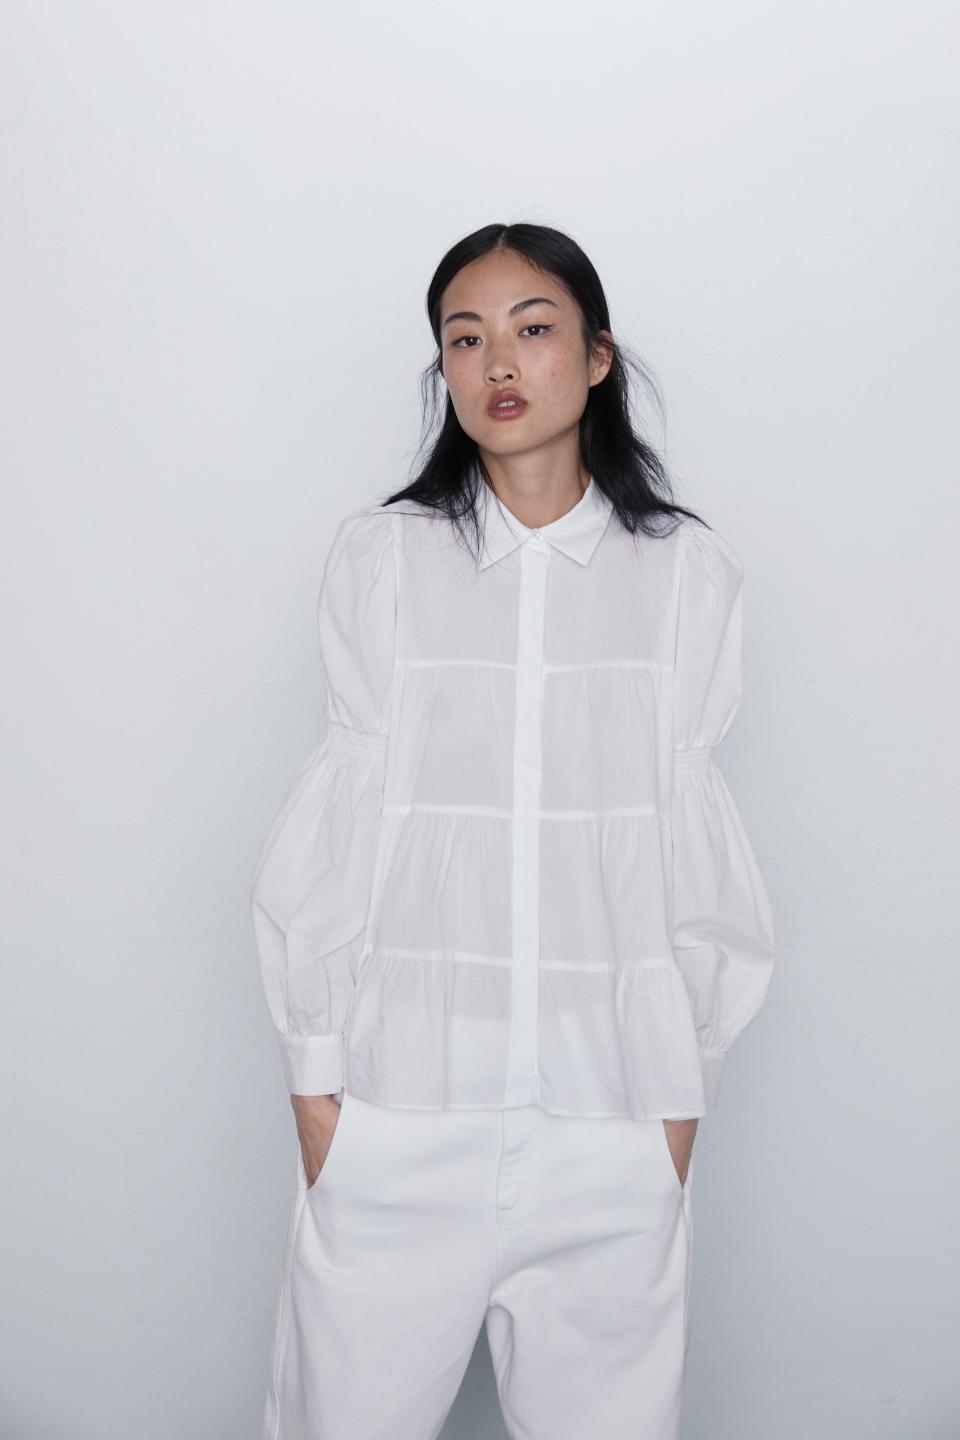 Zara’s Join Life collection—like this white cotton tiered shirt and pants—puts the emphasis on style and sustainability.